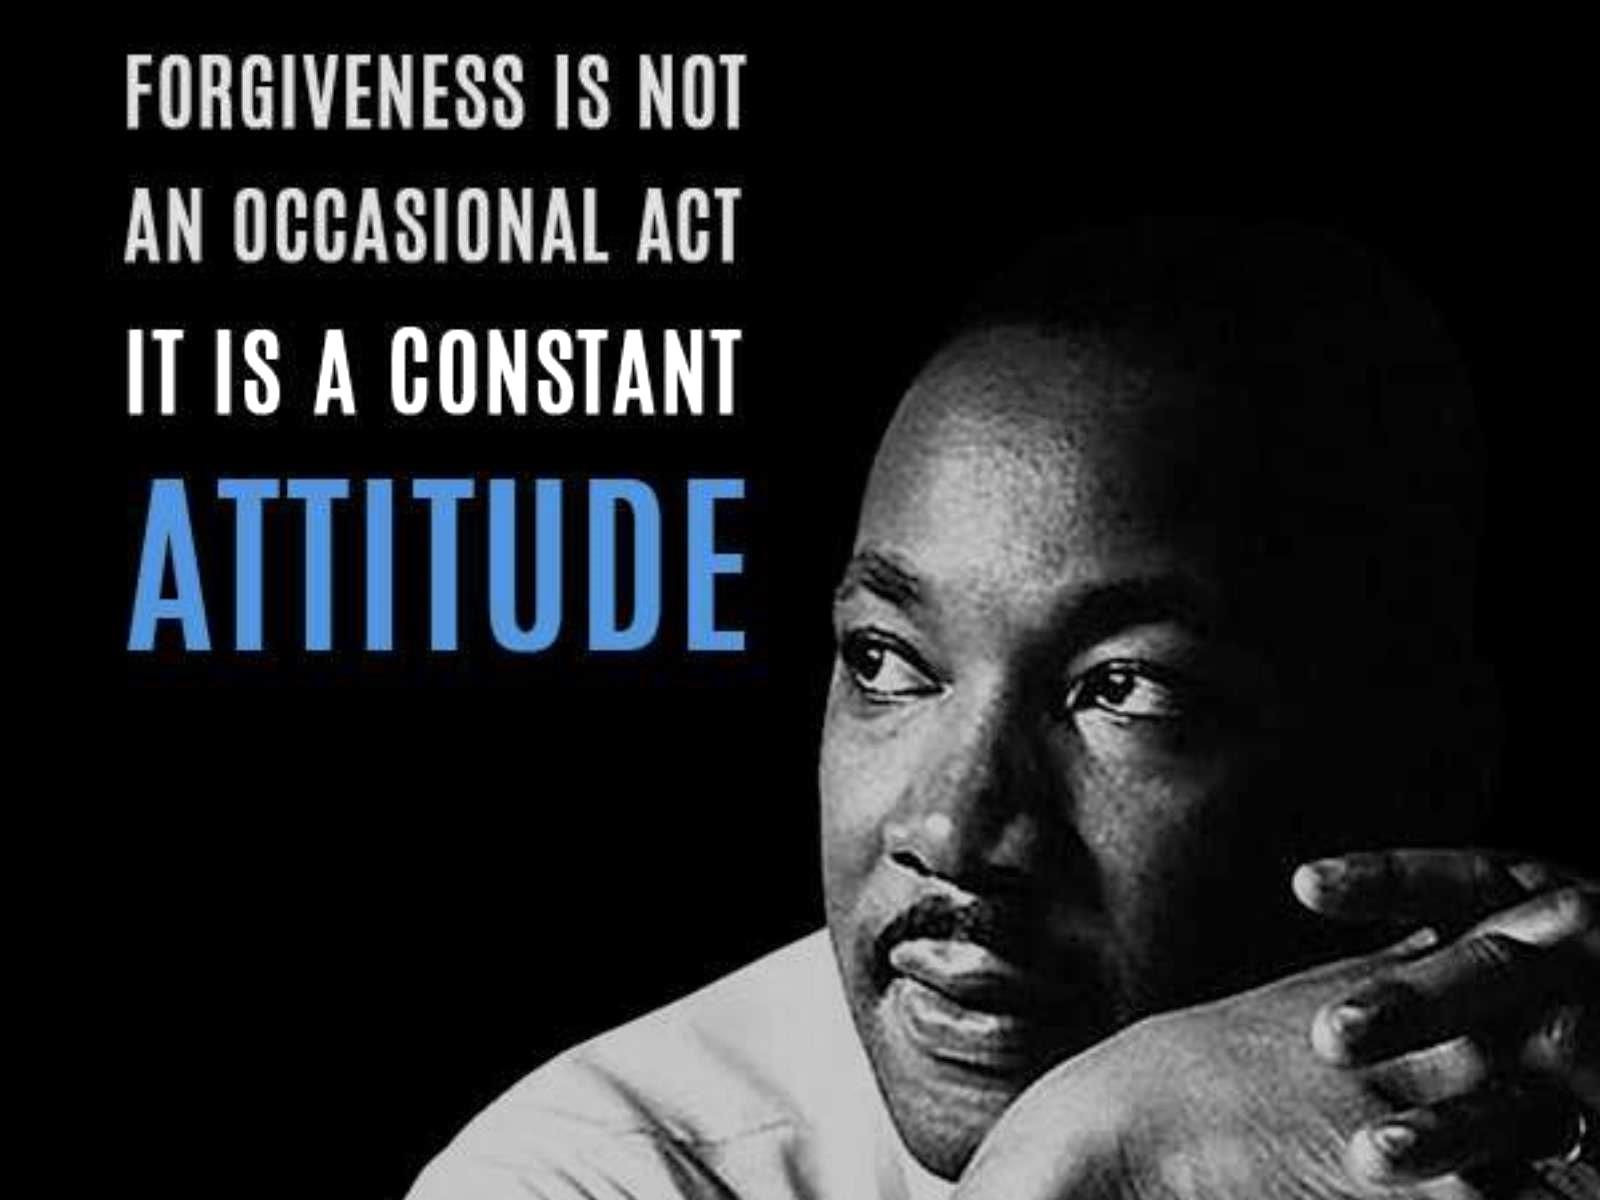 Martin Luther King Jr Education Quotes
 mlk quote education Google Search